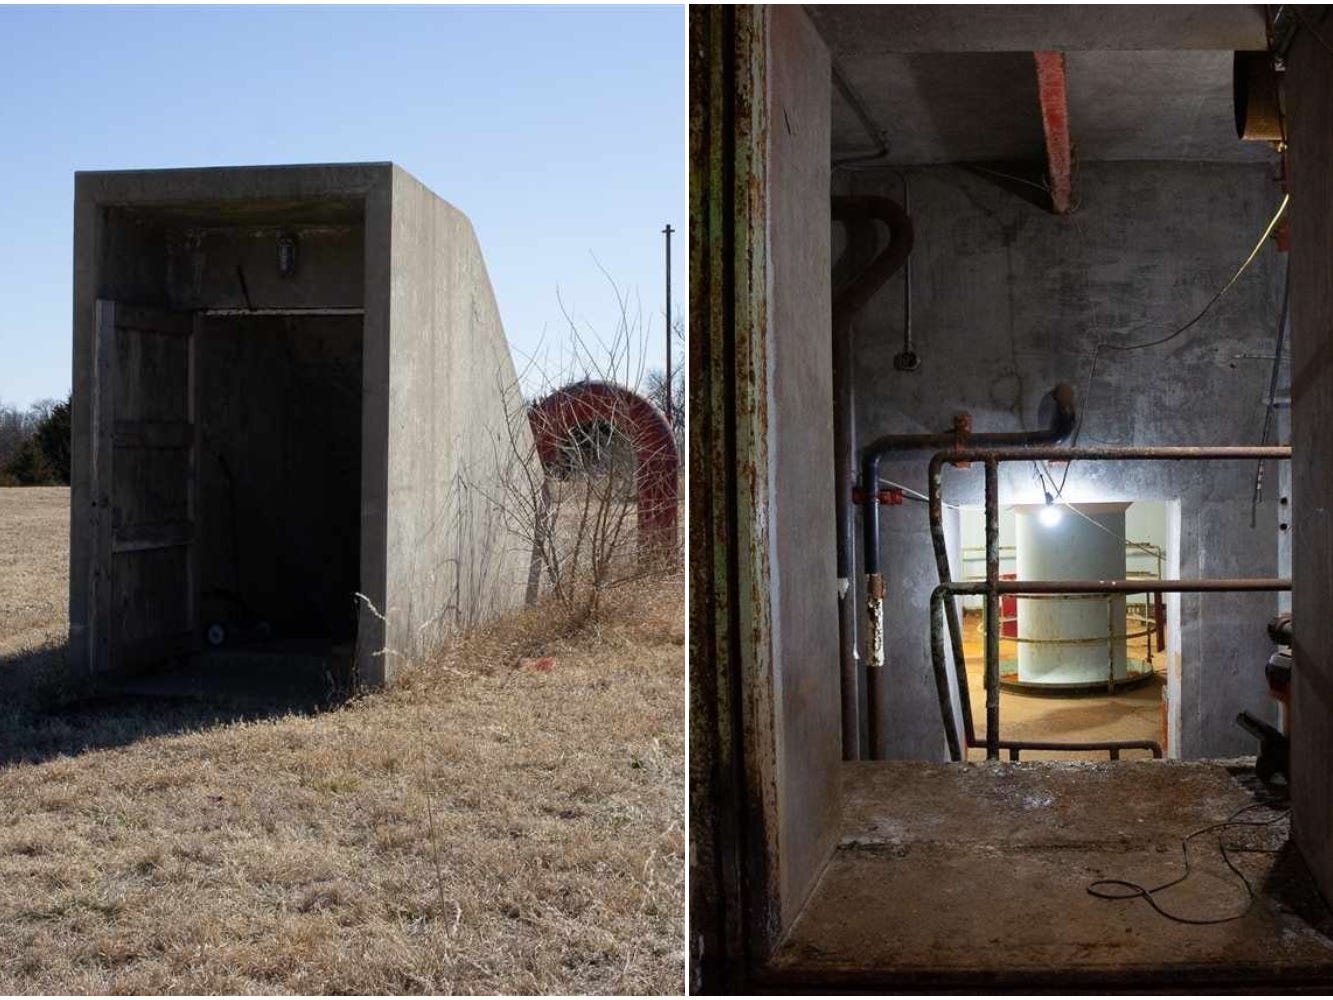 Interior and exterior shot of the decommissioned Atlas F missile silo complex.